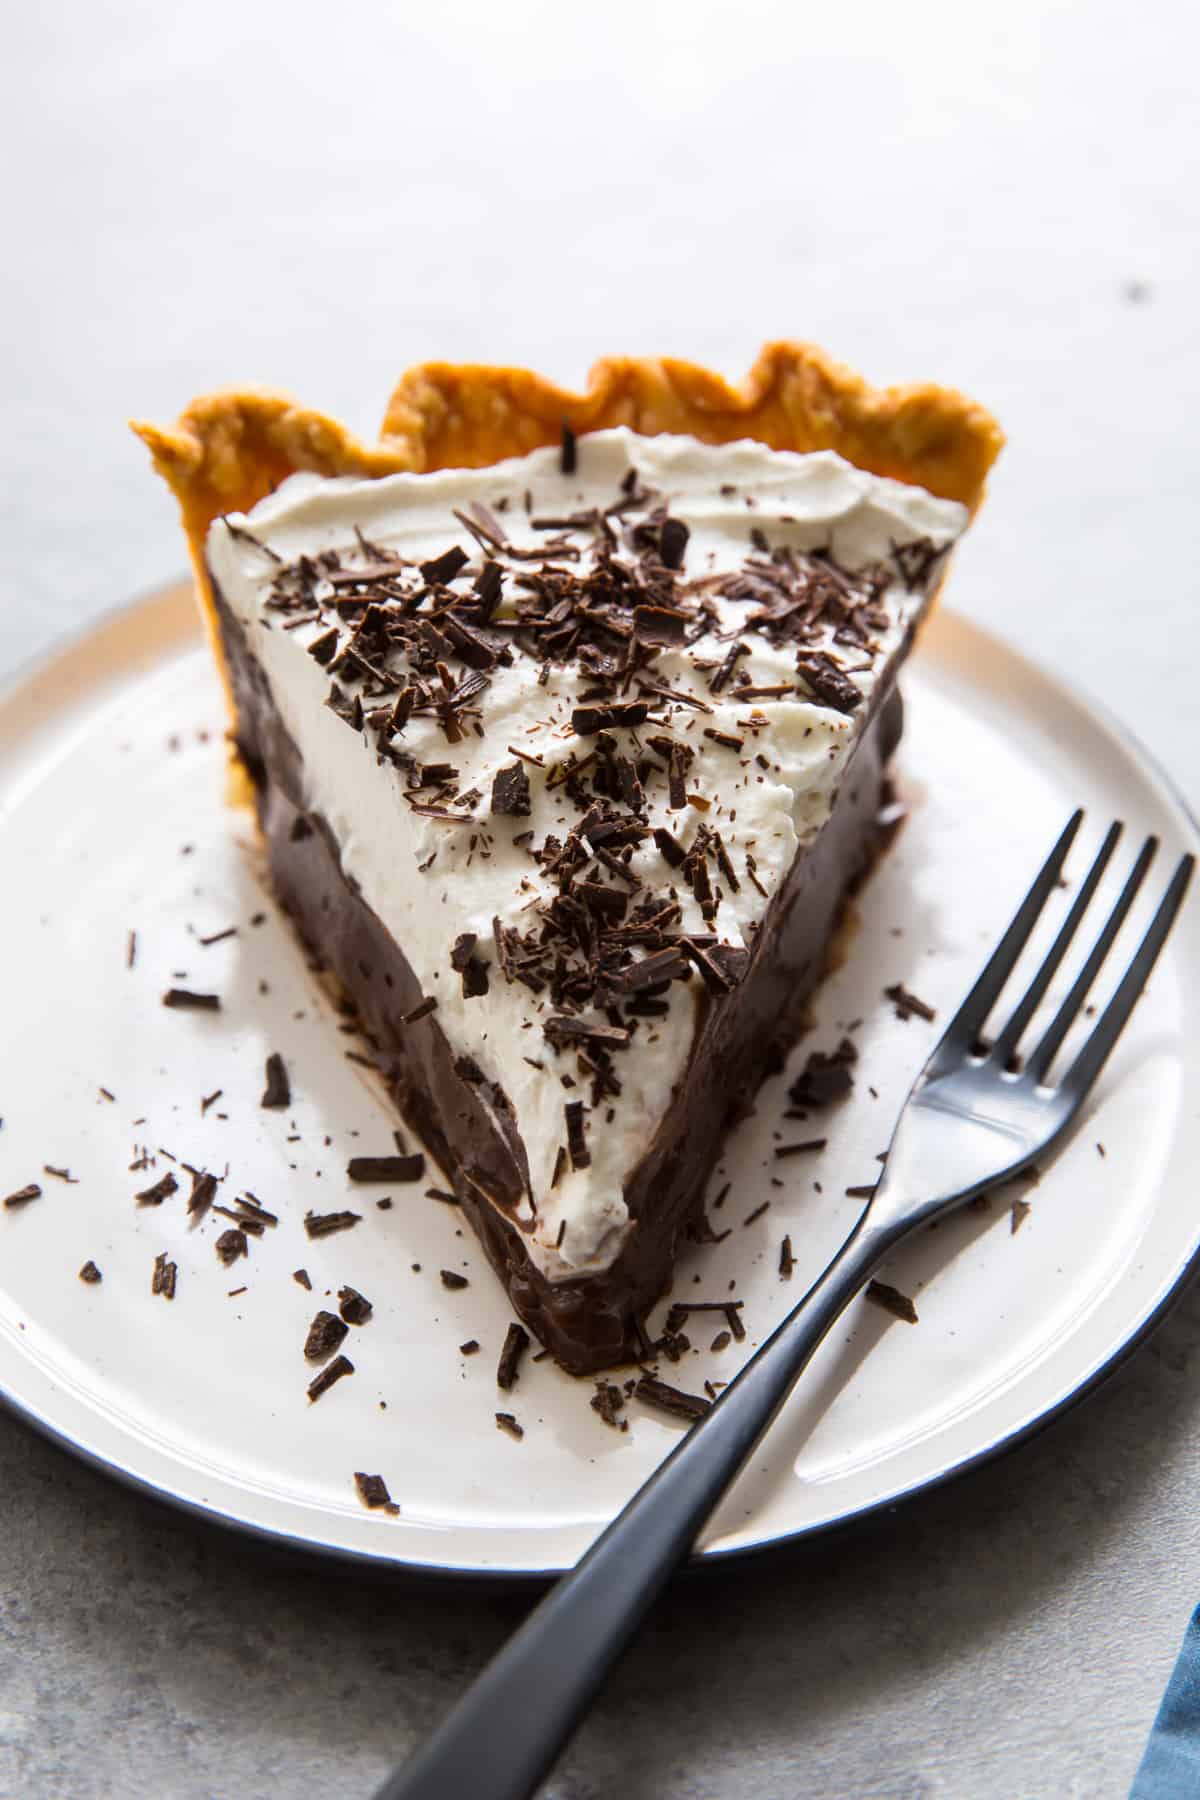 A close up of a slice of pie on a white plate with a fork.